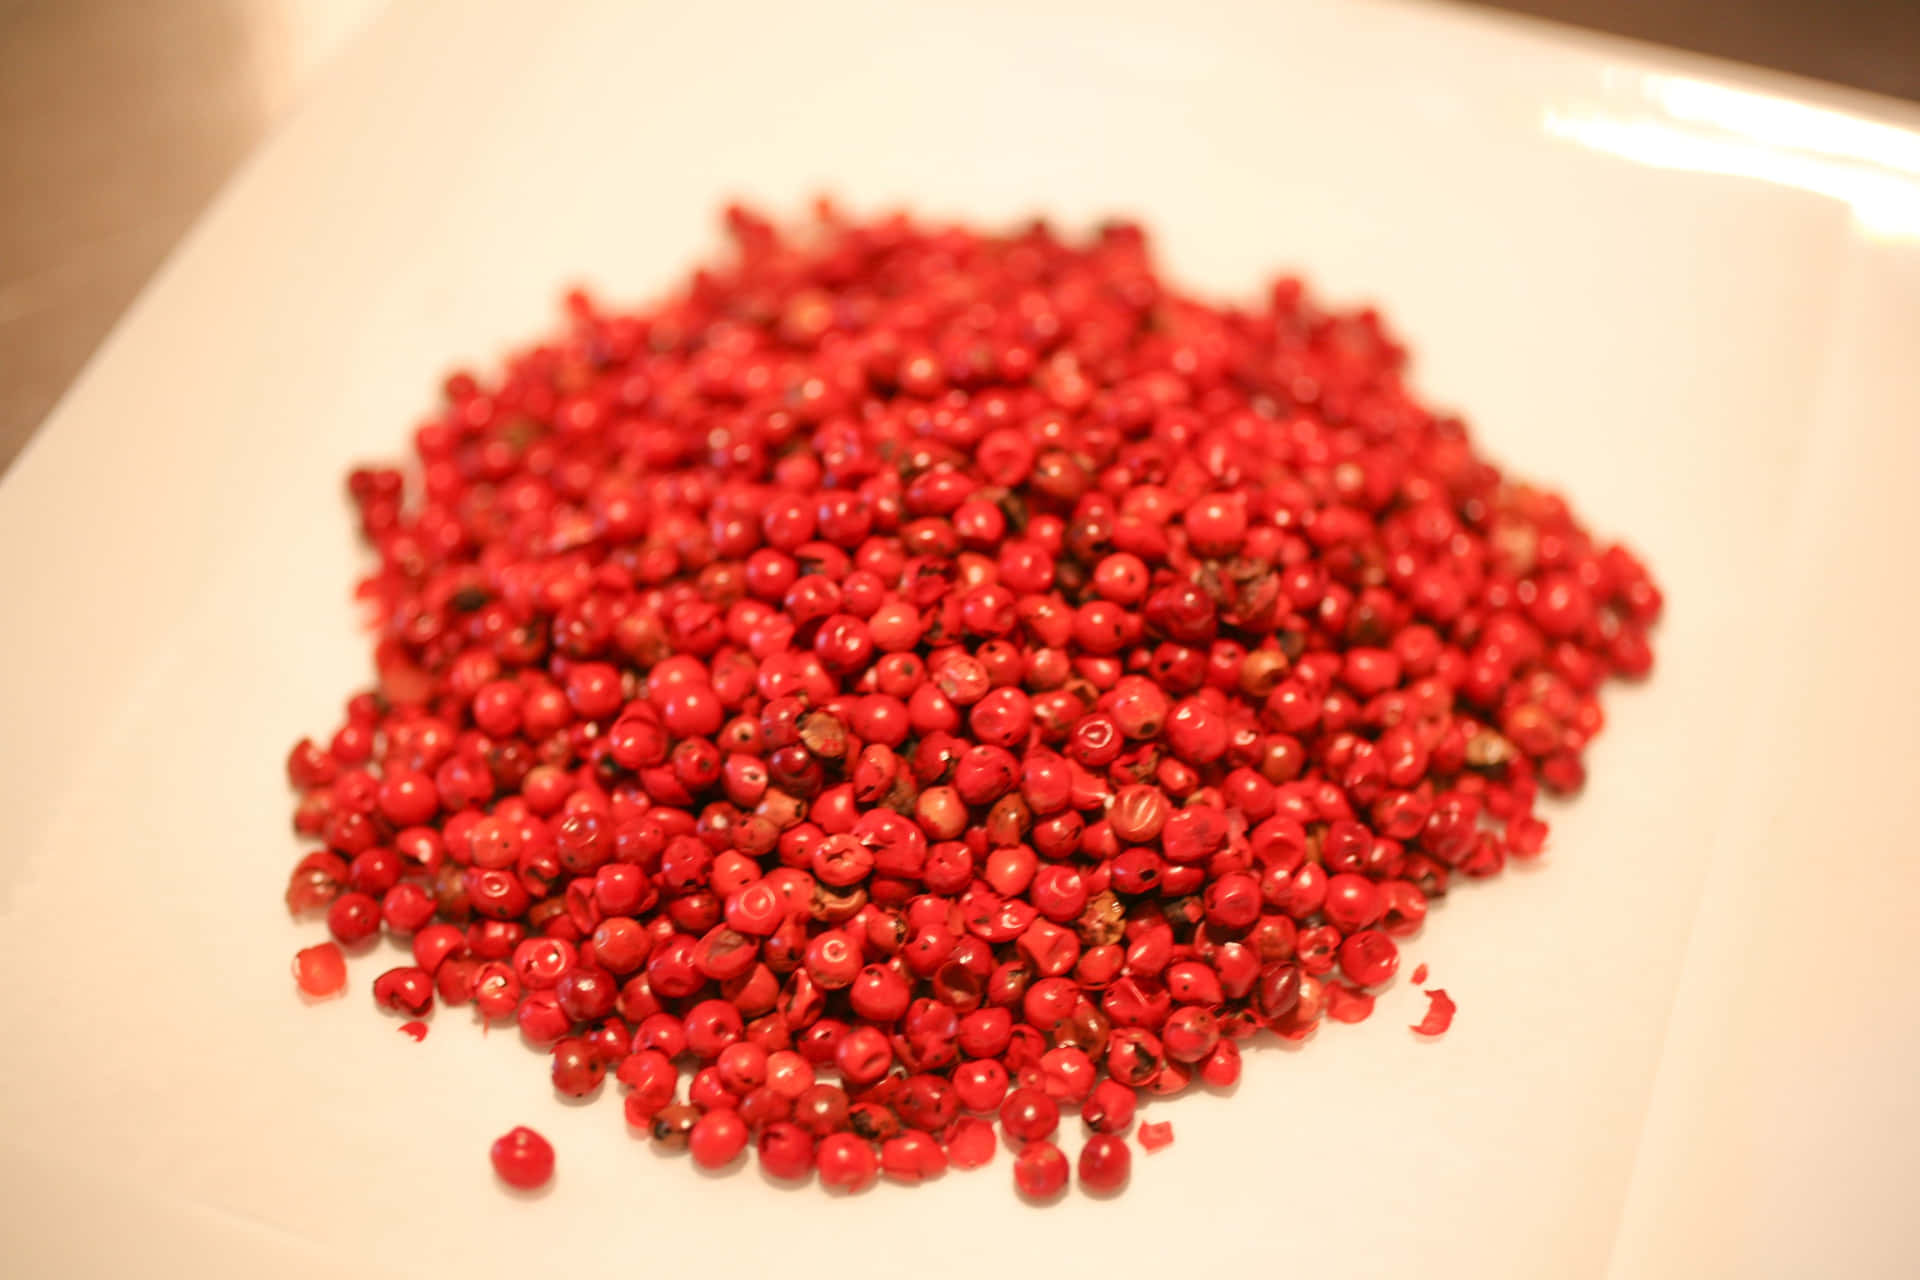 A close-up of Pink Peppercorns on a wooden surface Wallpaper